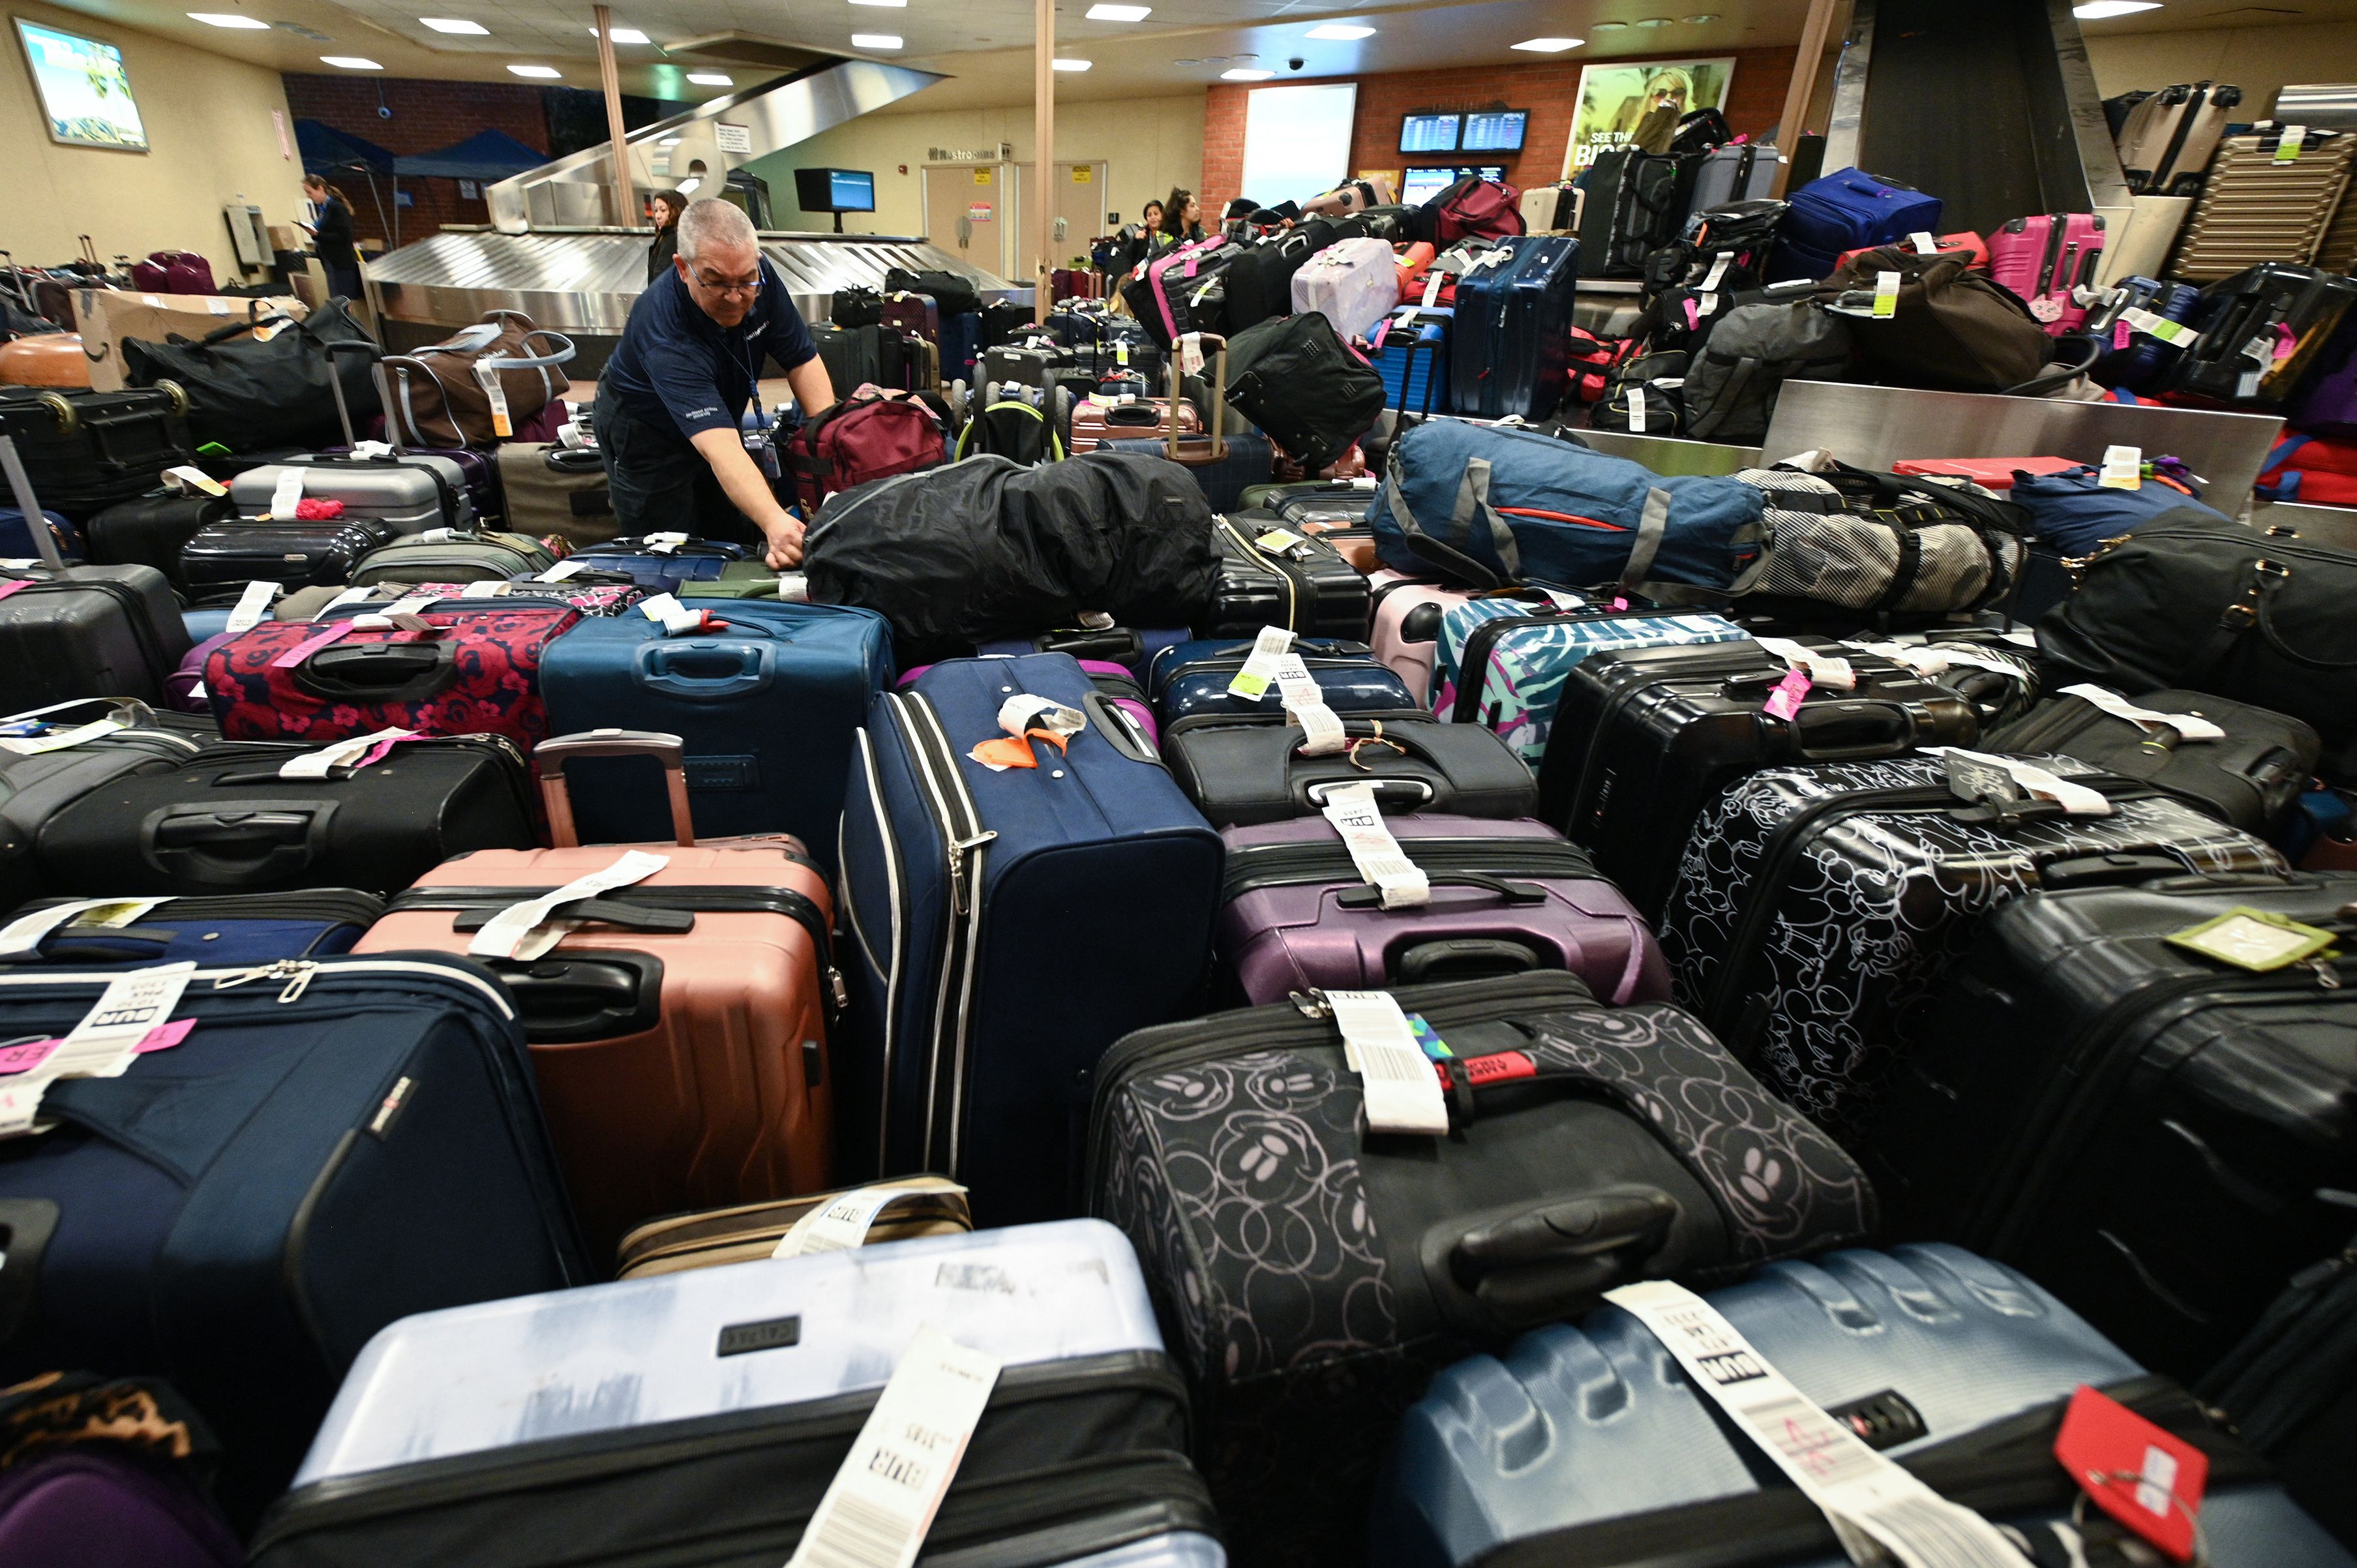 Luggage, passengers stranded in Las Vegas as flights continue to